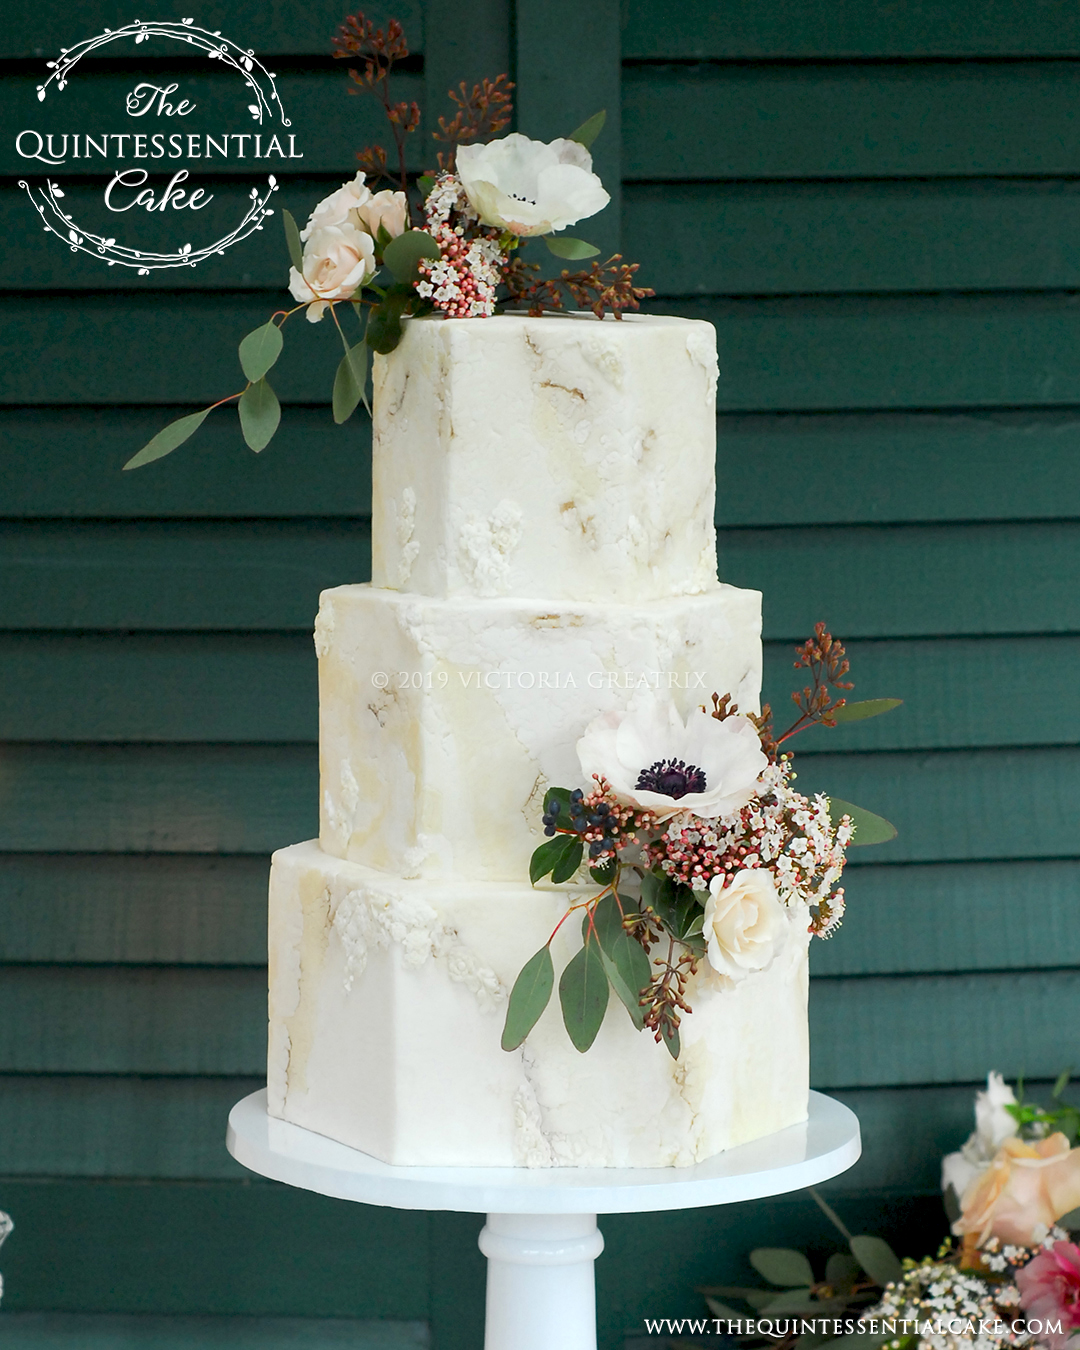 Rough Stone Texture with Bas Relief Detailing and Fresh Flowers | The Quintessential Cake | Chicago | Luxury Wedding Cakes | Danada House